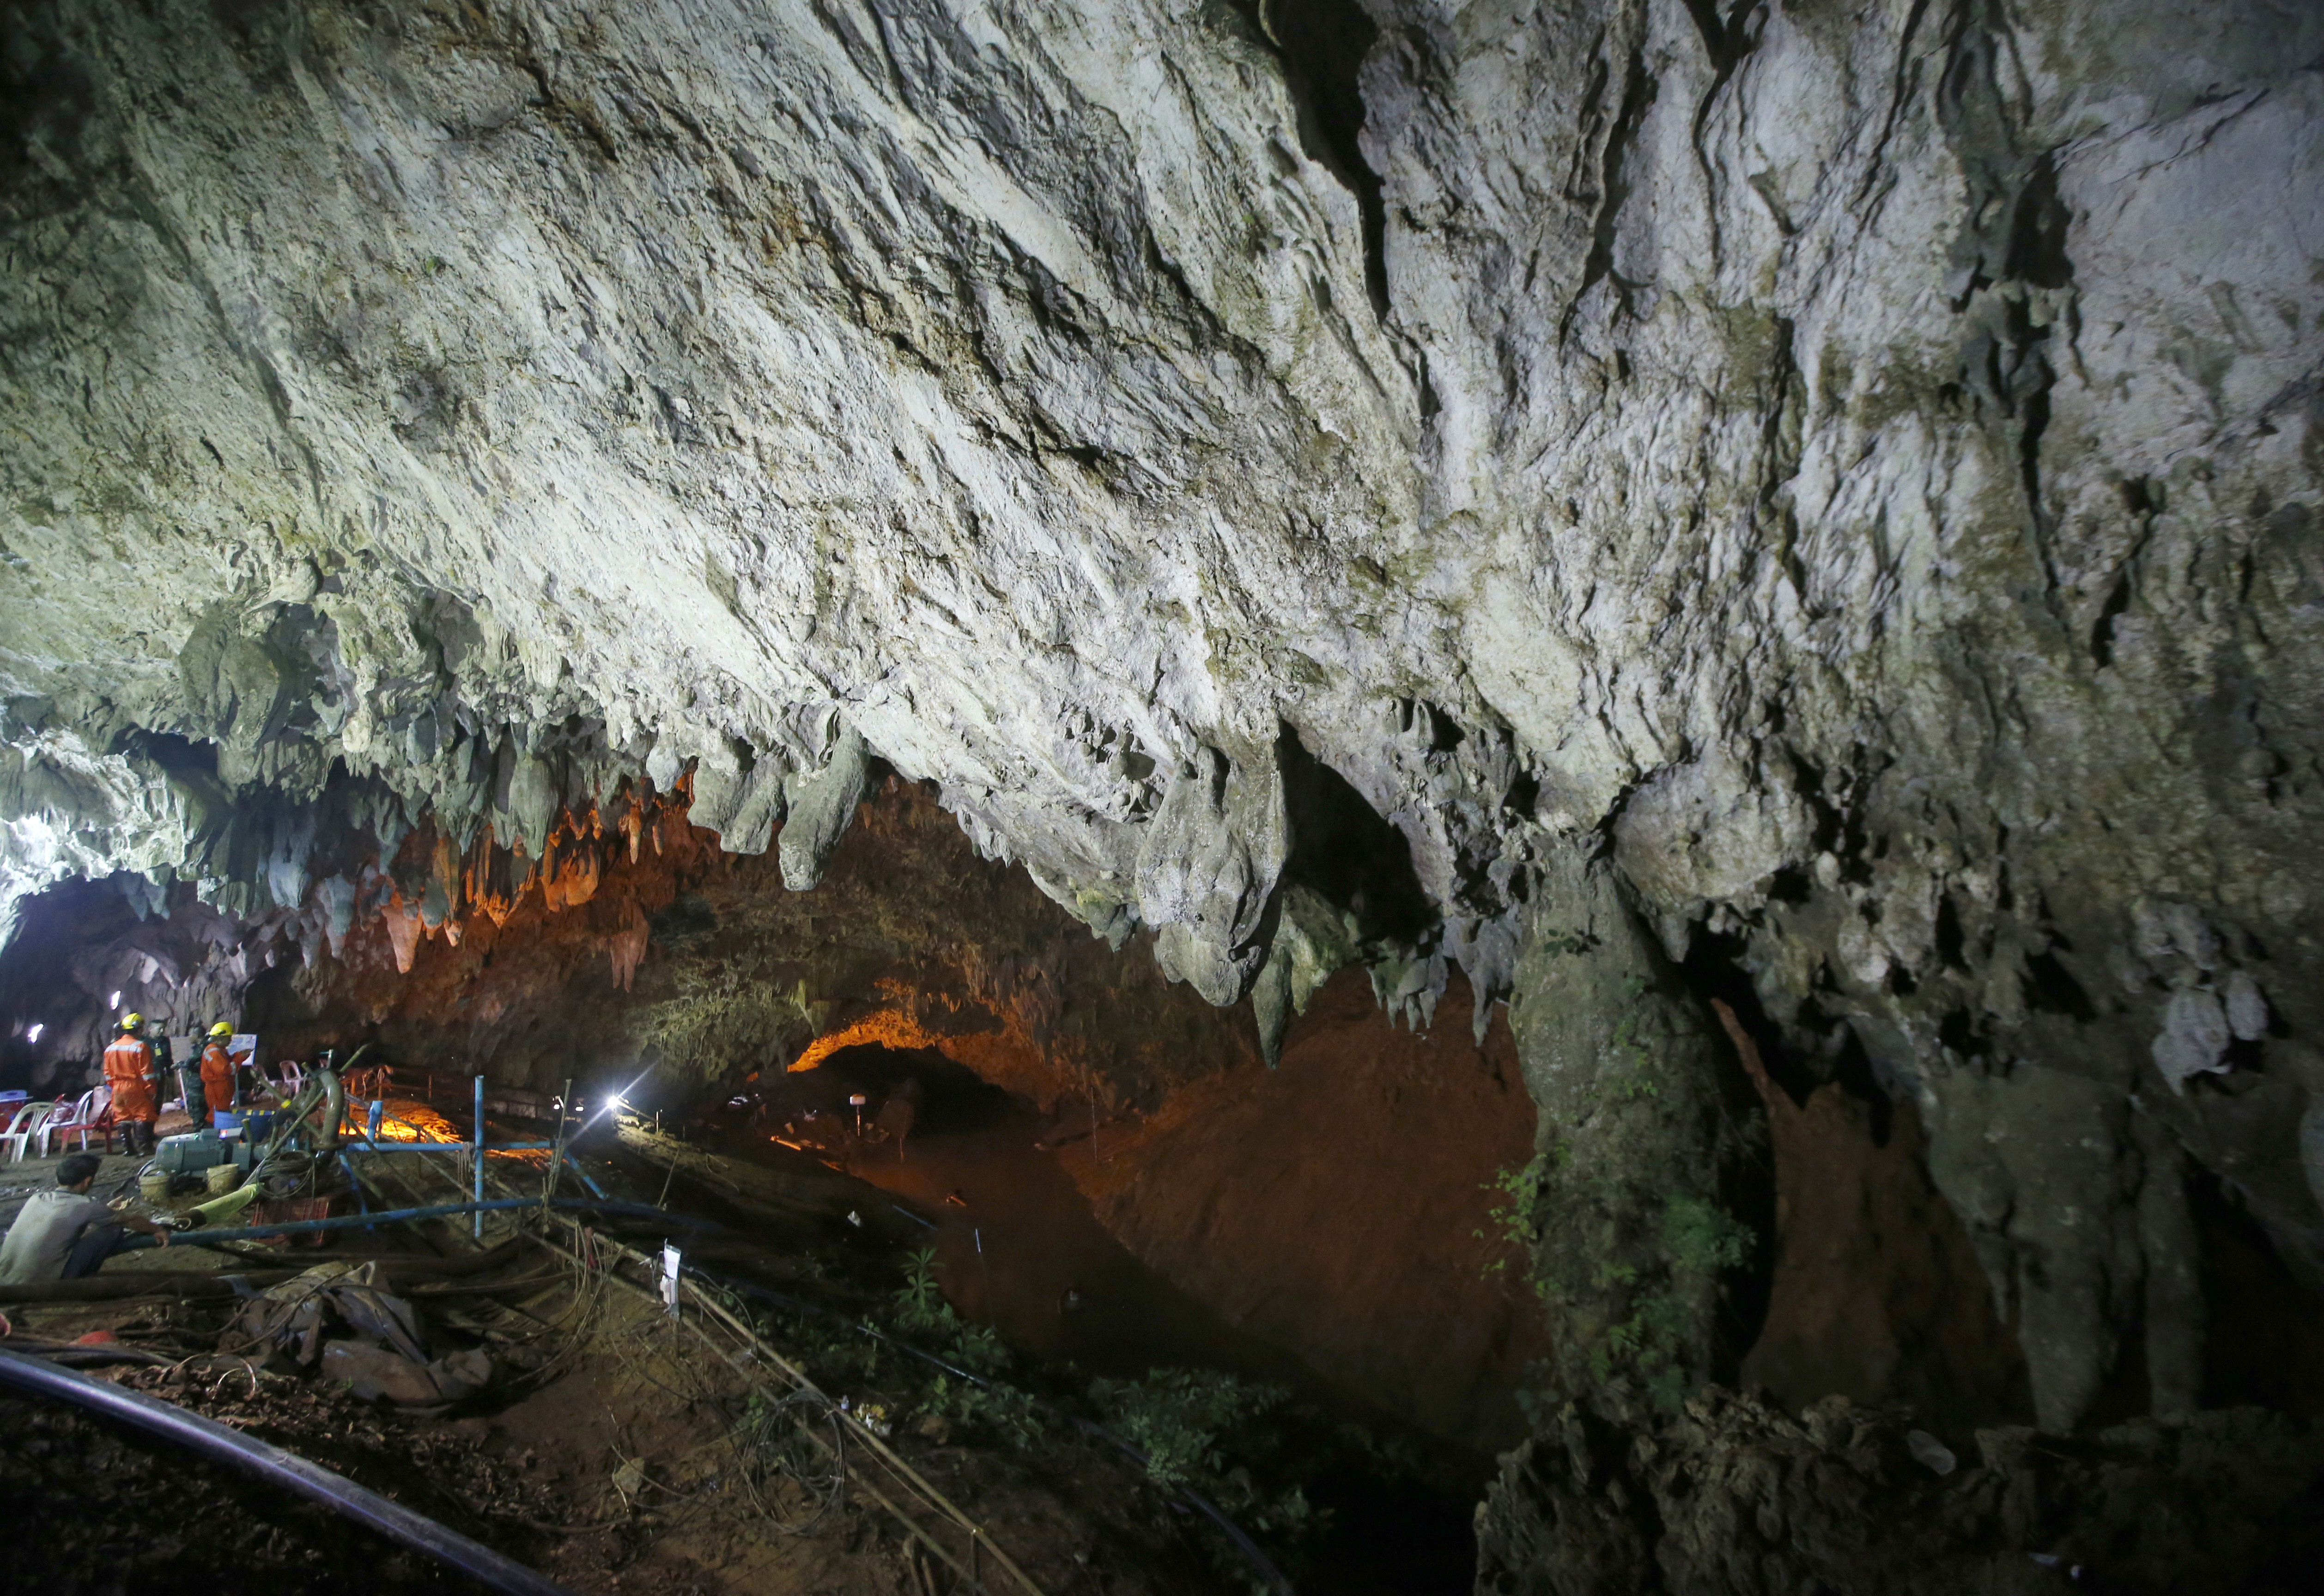 Rescuers work at the entrance to a cave complex where 12 soccer team members and their coach went missing, in Mae Sai, Chiang Rai province, in northern Thailand Saturday, June 30, 2018. Rescuers have been searching for them. (AP Photo/Sakchai Lalit)